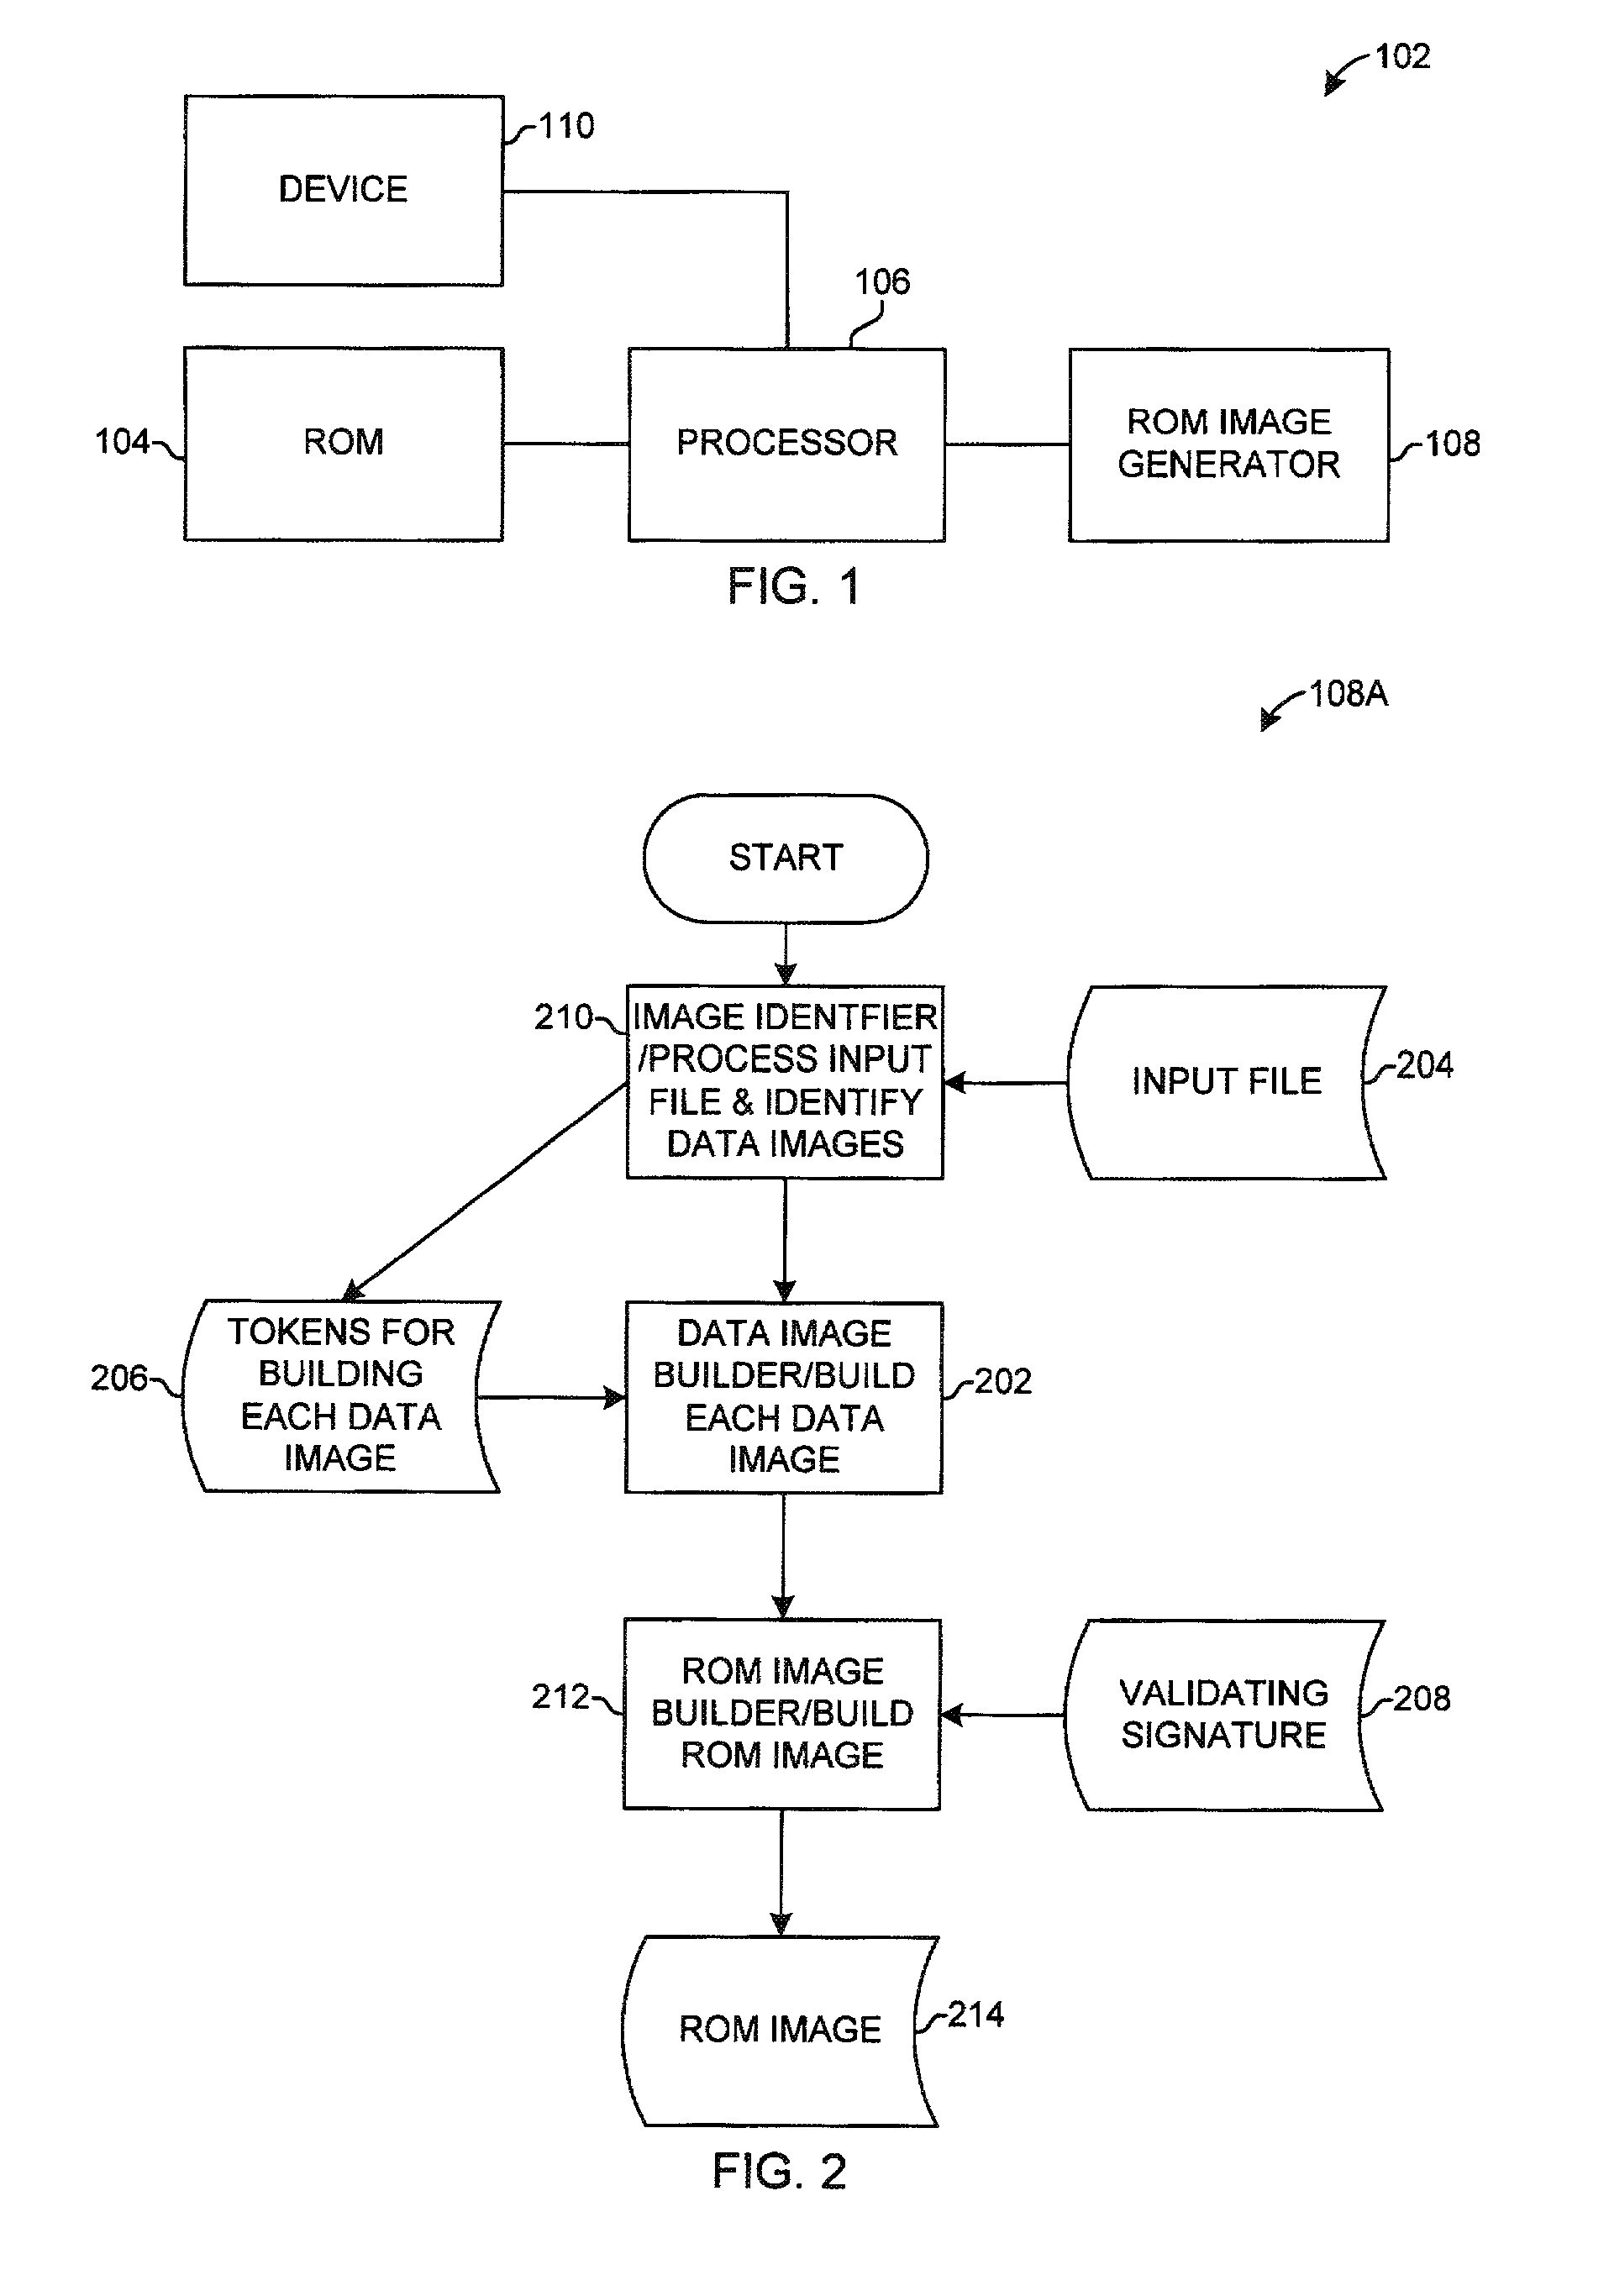 Method for generating a read only memory image